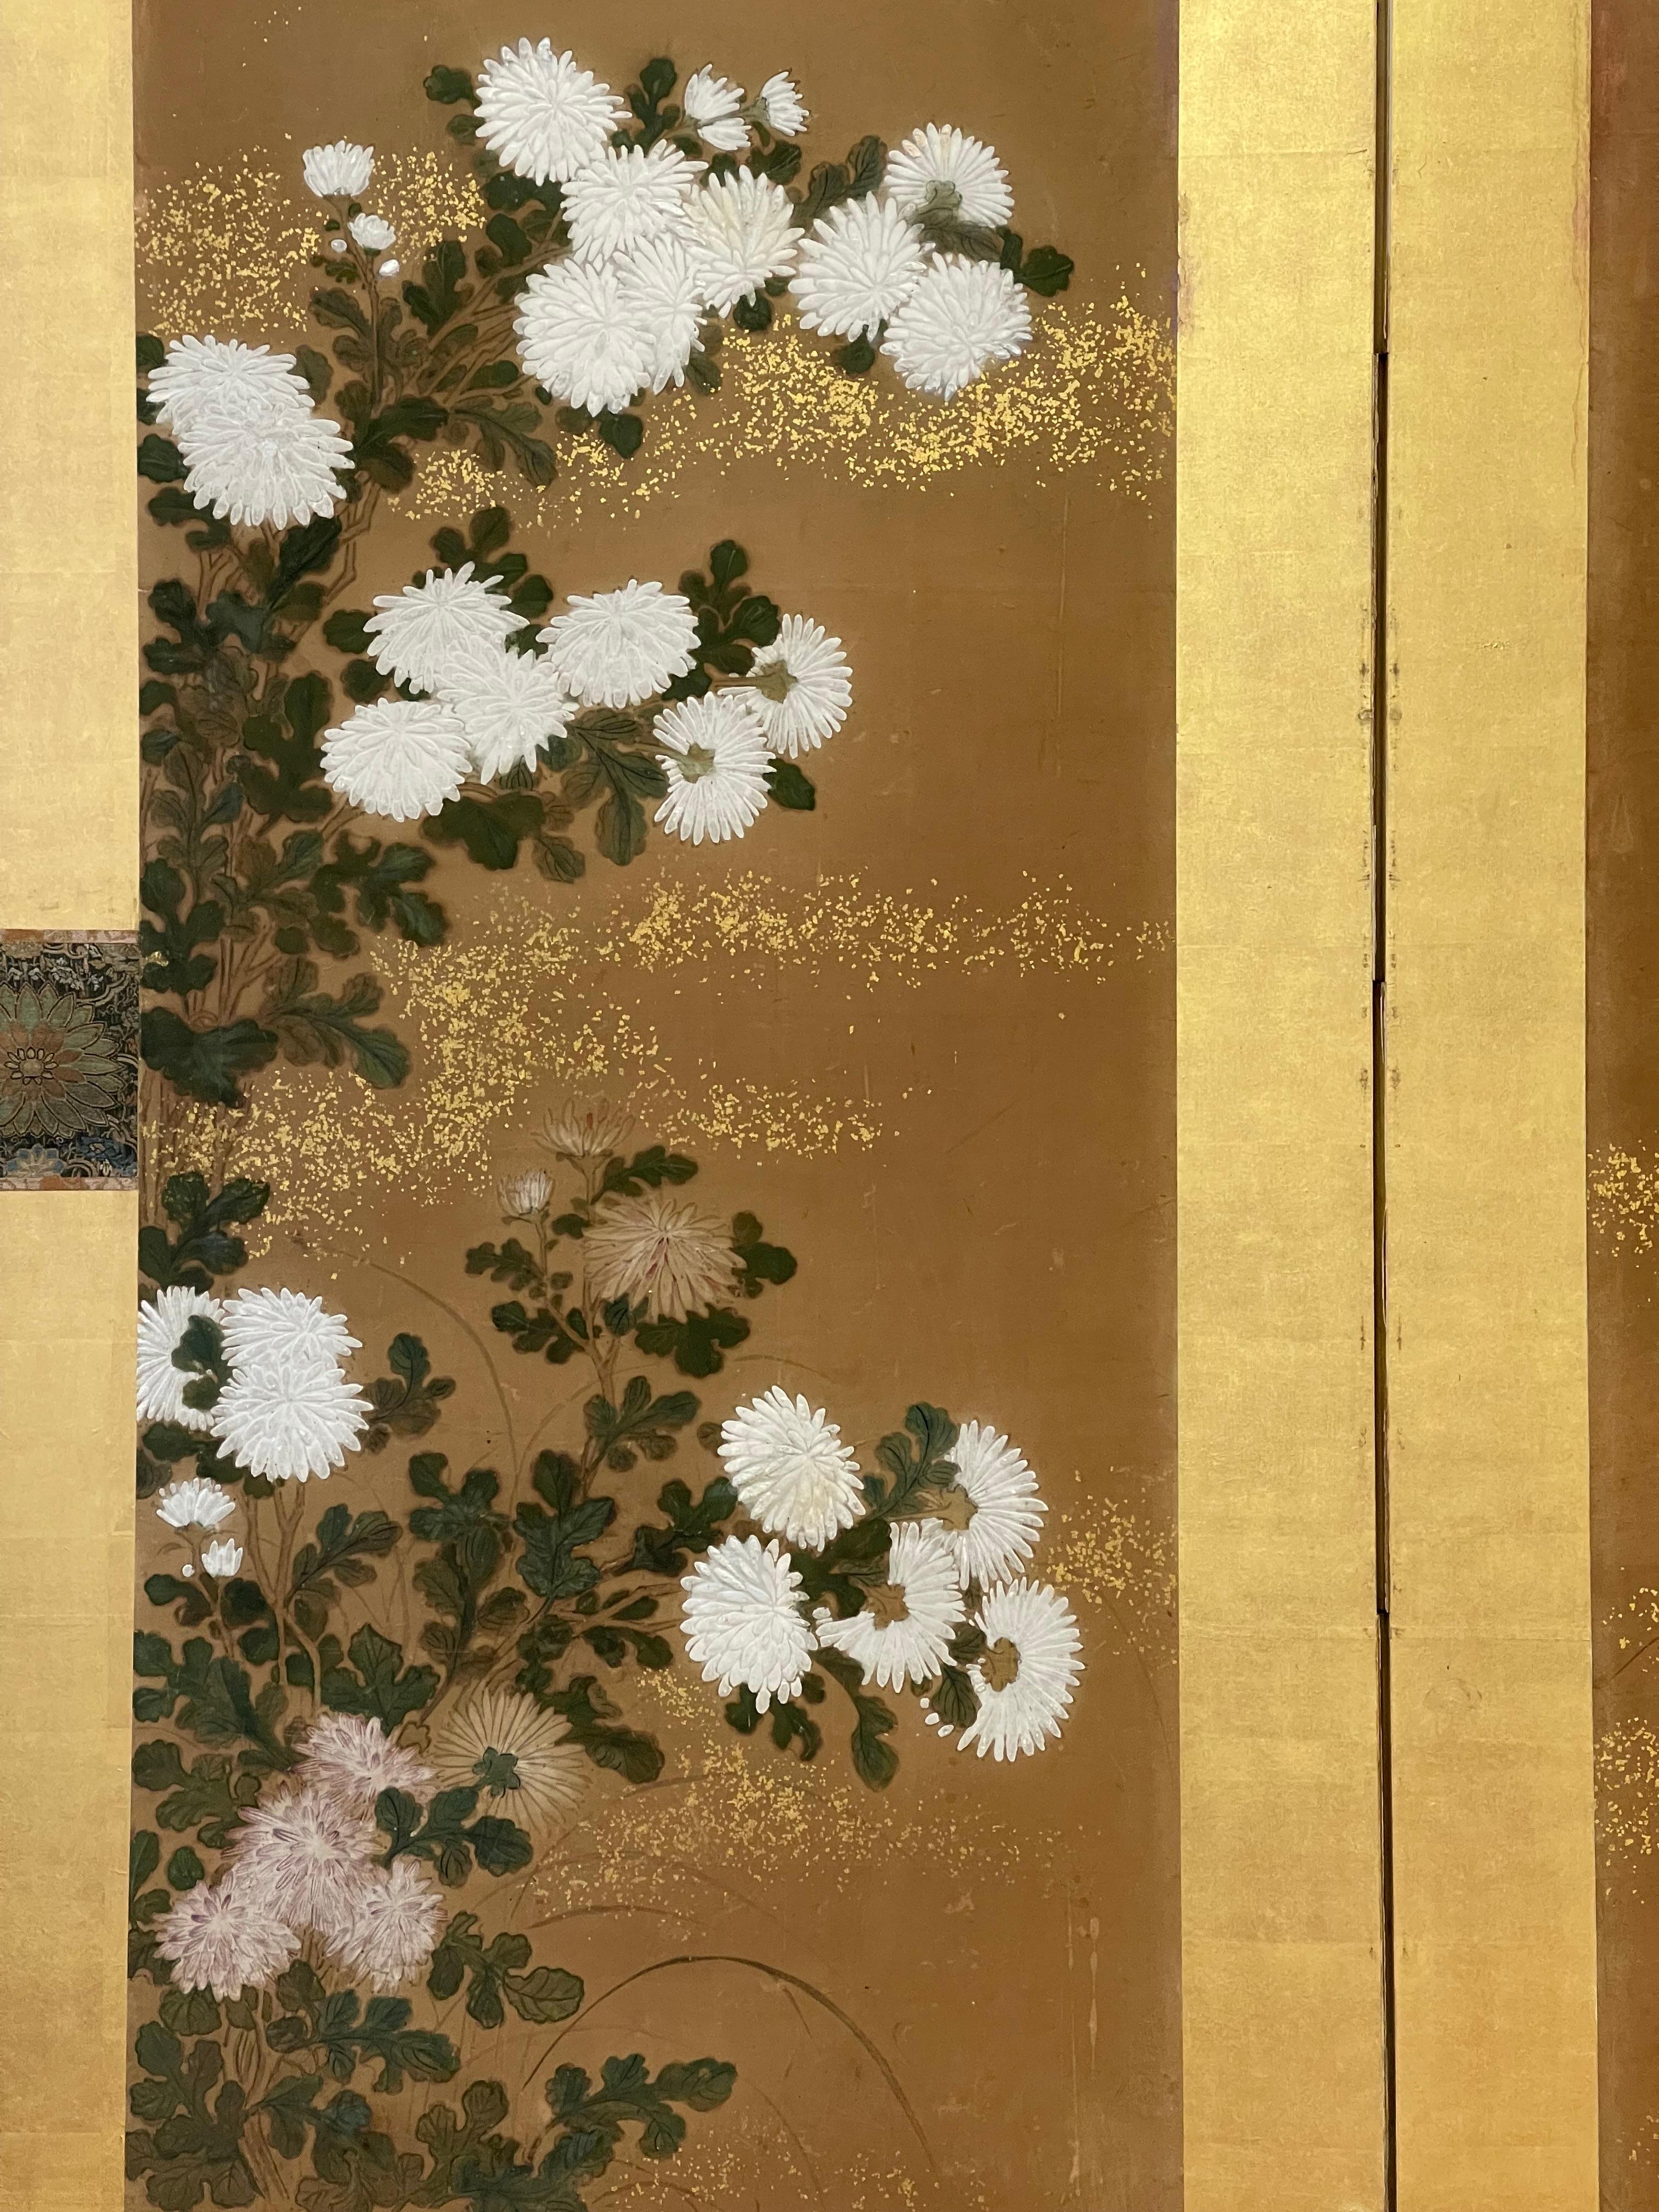 Gorgeous two panel Japanese screen featuring chrysanthemums 17th century. Featuring Oyster shell lacquer (Gofun), Mineral paint and gold dust on mulberry paper. Sumptuous brocades of silk with gold leaf frame. A masterpiece of design and composition